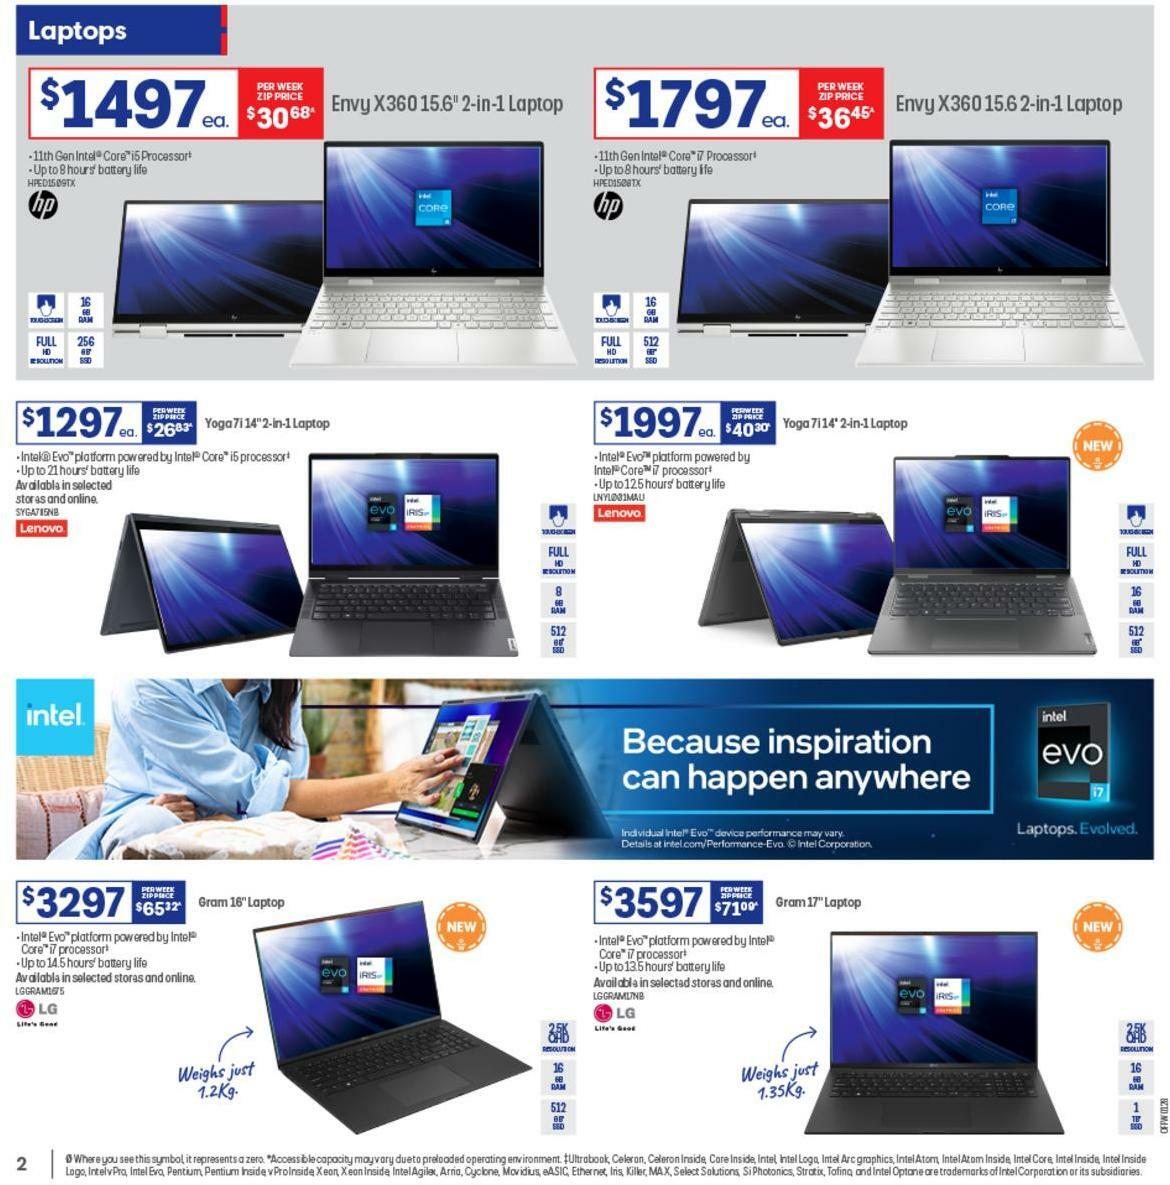 Officeworks Catalogues from 11 May